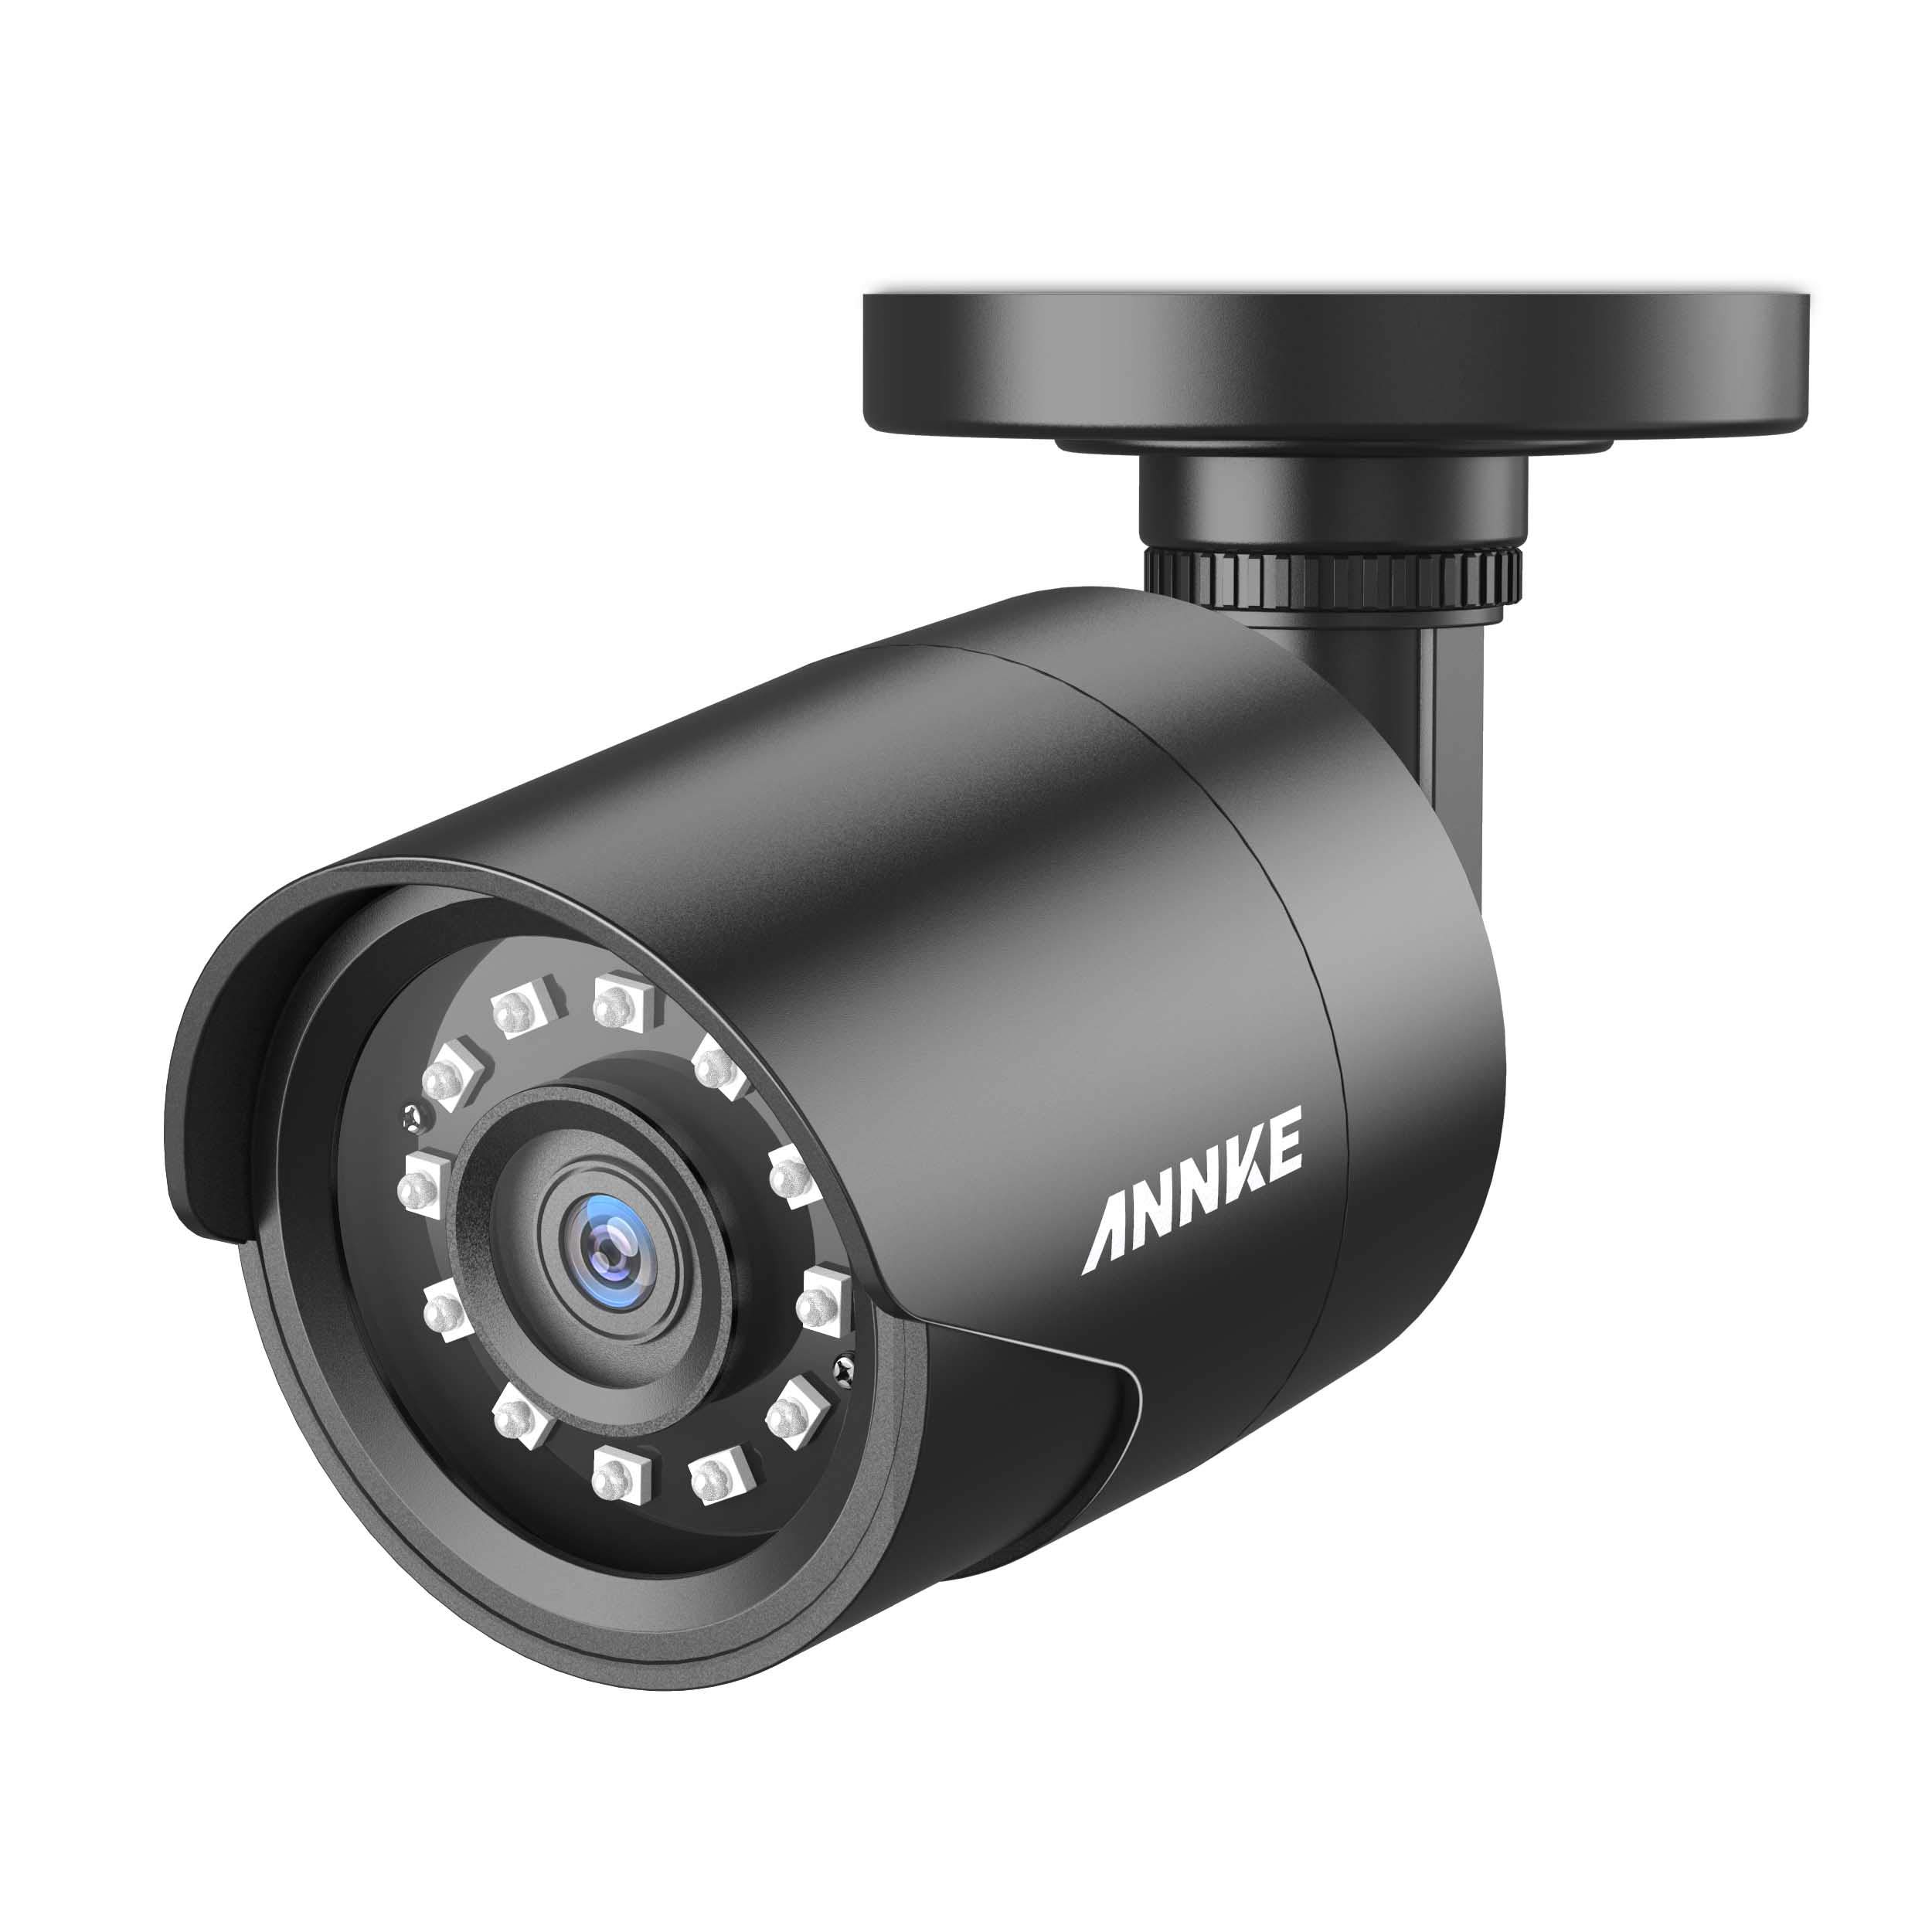 ANNKE 1080p HD-TVI Security Surveillance Camera: Crystal Clear Footage, 2MP Bullet Camera with Super Night Vision for Home CCTV System